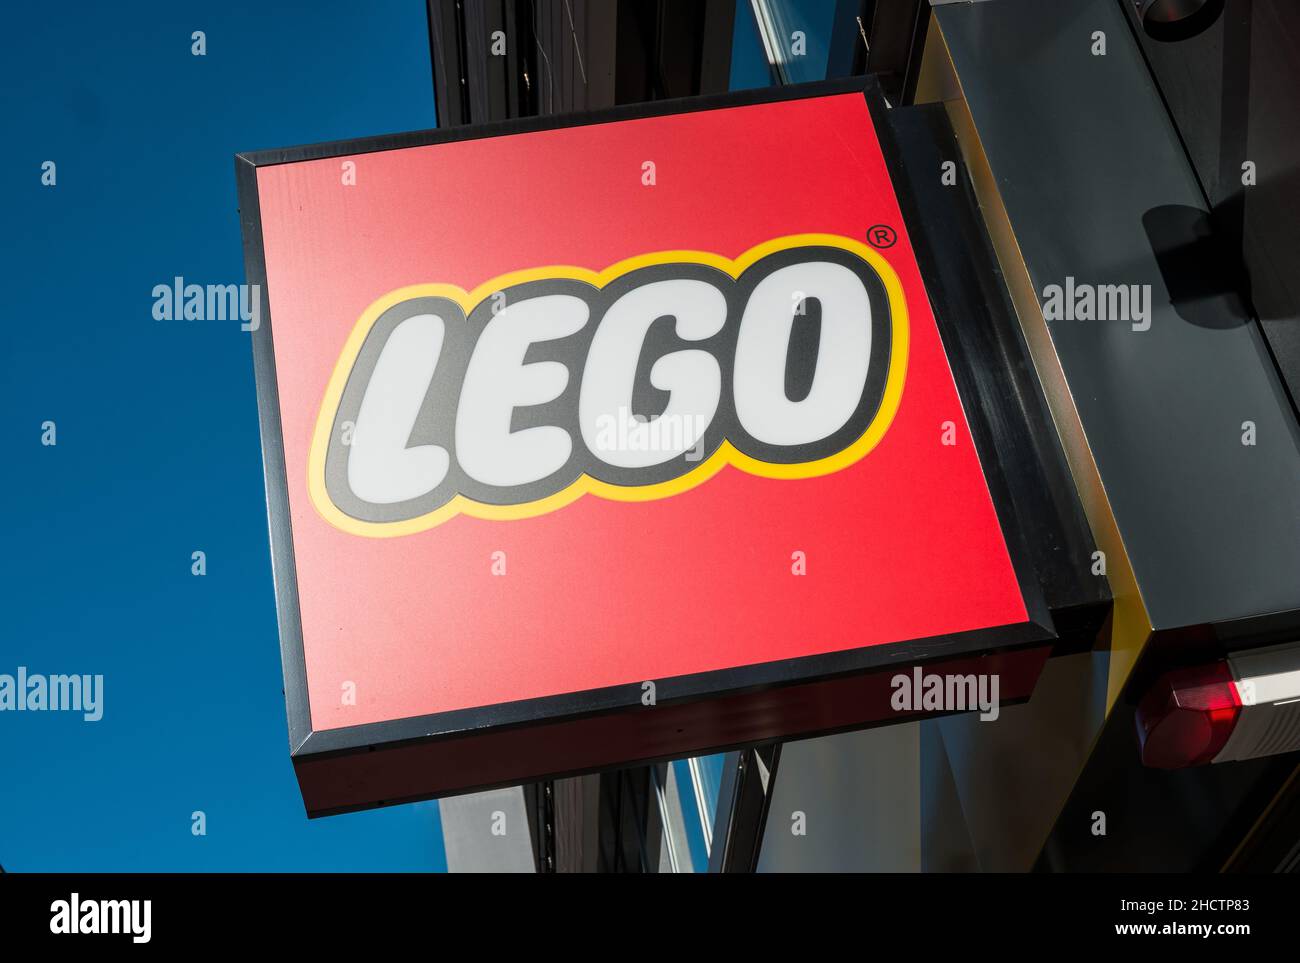 Lego logo on a building. Lego is a line of plastic construction toys that are manufactured by The Lego Group, a privately held company based in Billun Stock Photo